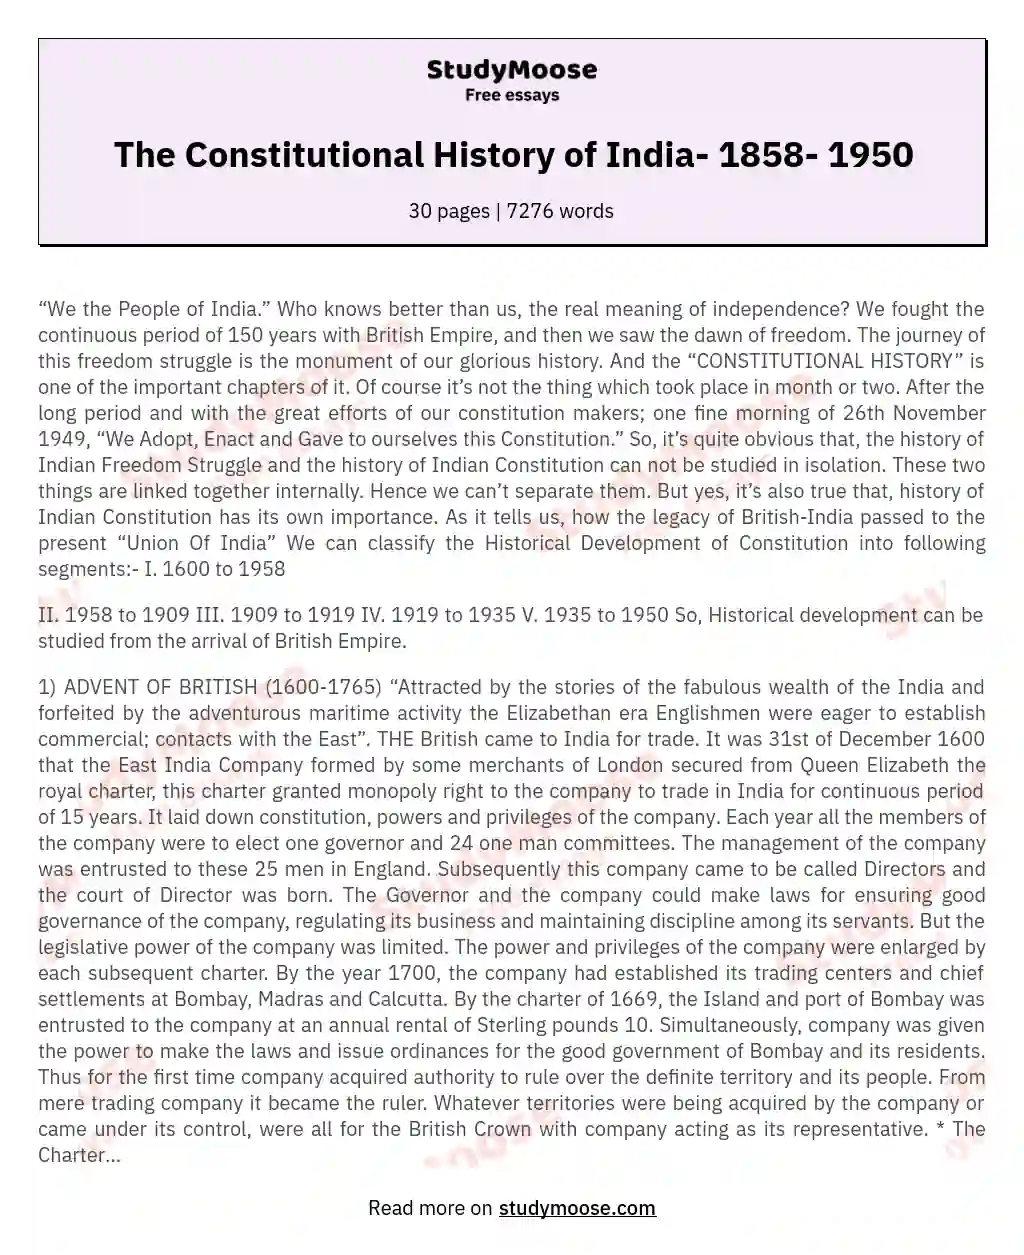 The Constitutional History of India- 1858- 1950 essay